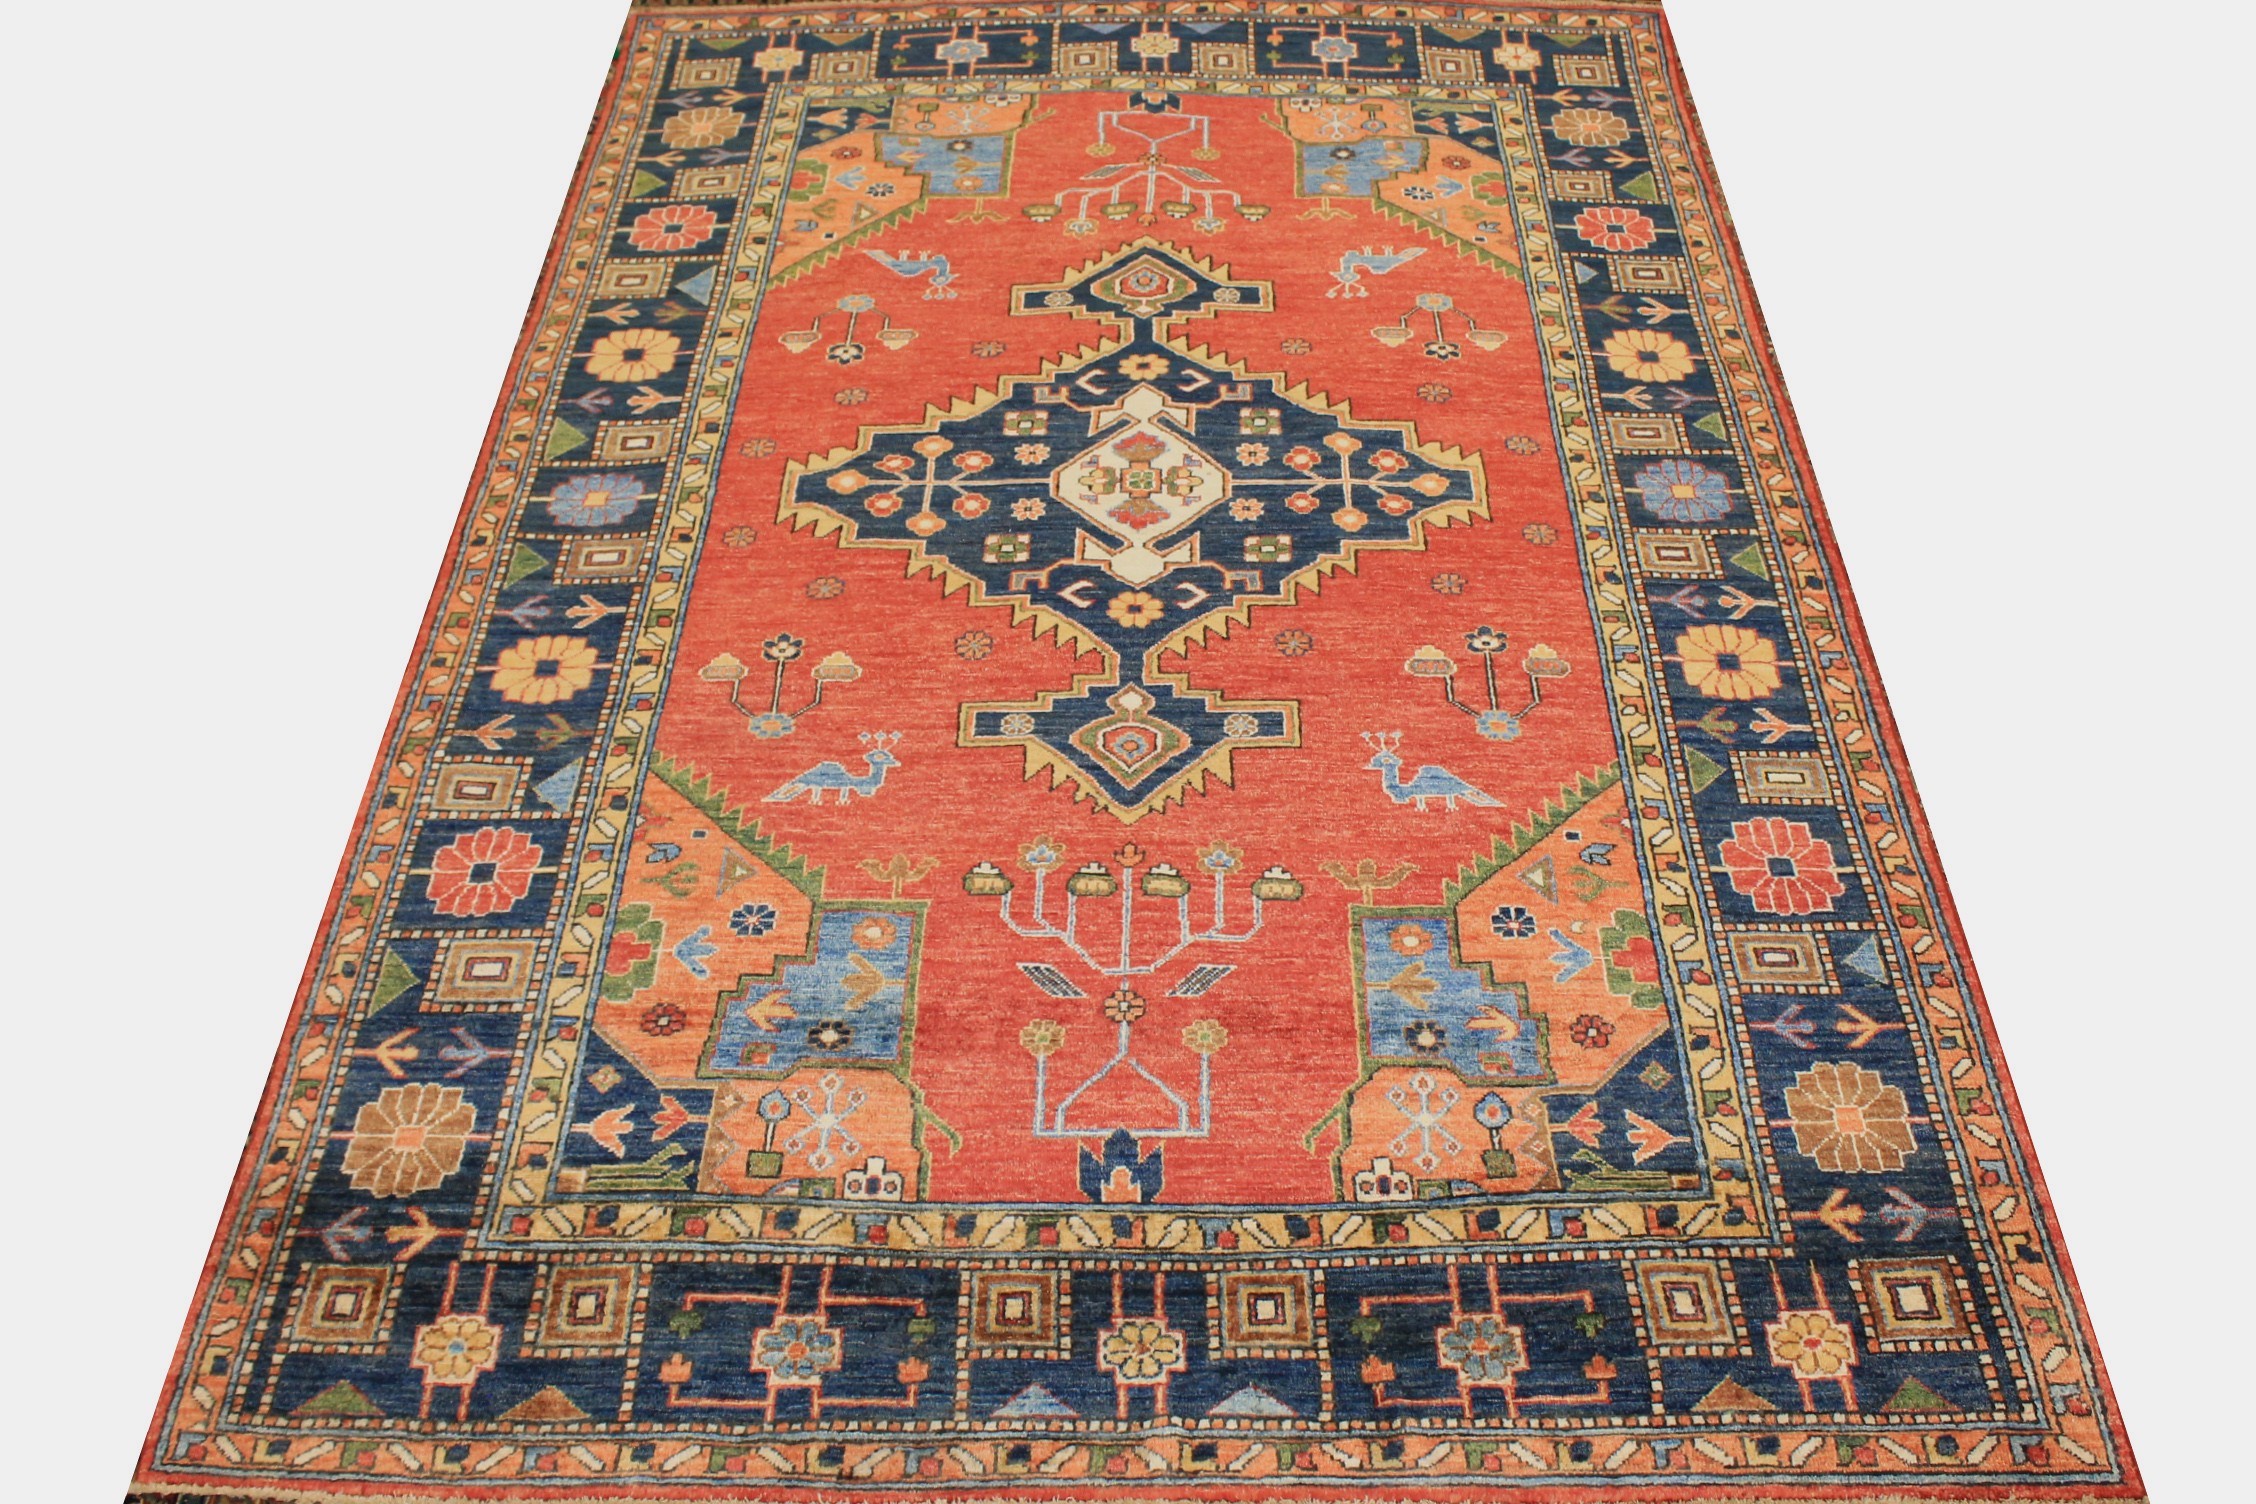 6x9 Aryana & Antique Revivals Hand Knotted  Area Rug - MR026674